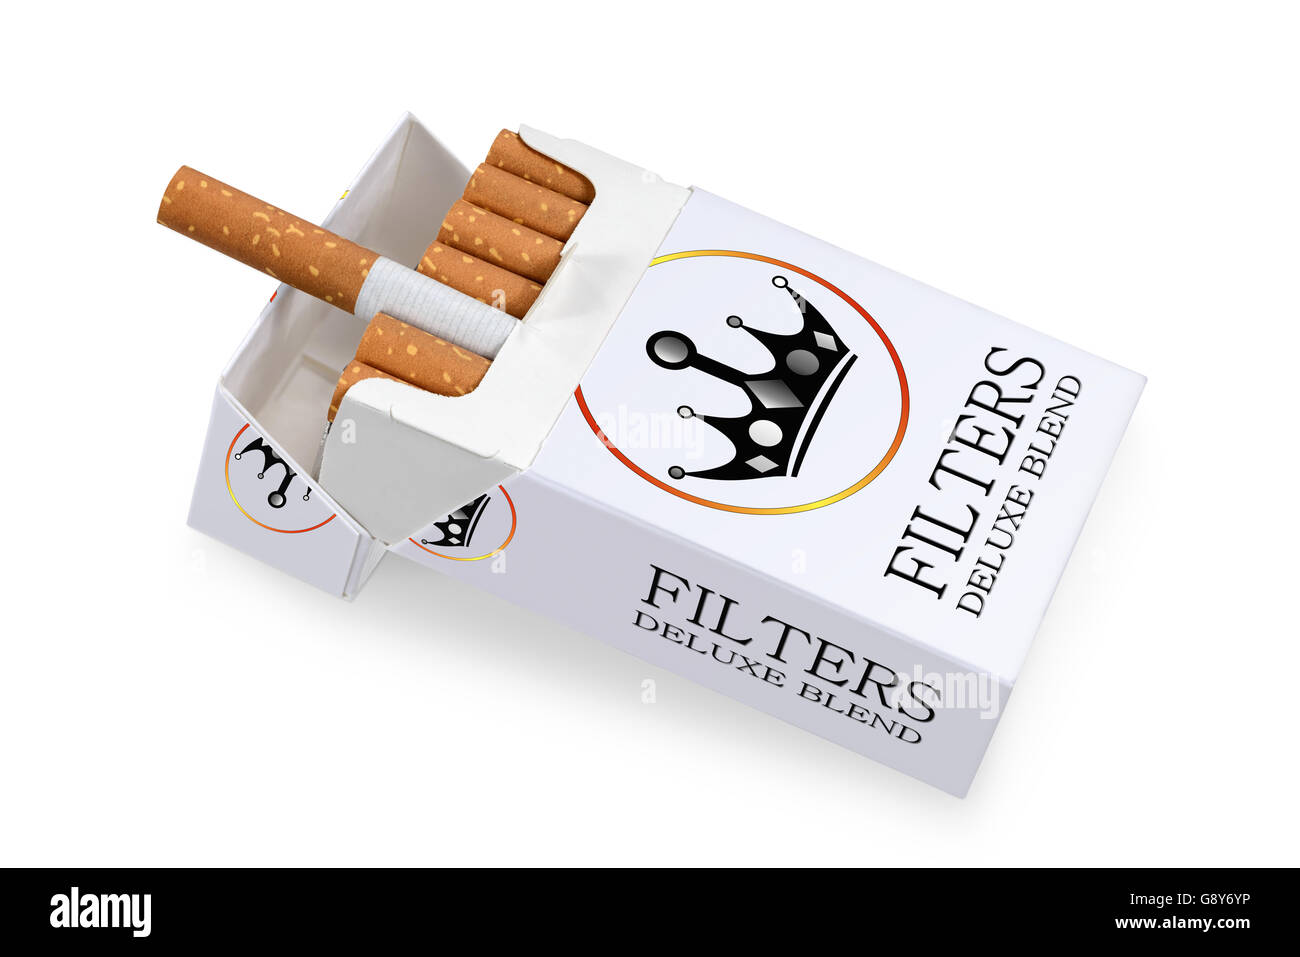 Fictive packet box of filter cigarettes Stock Photo